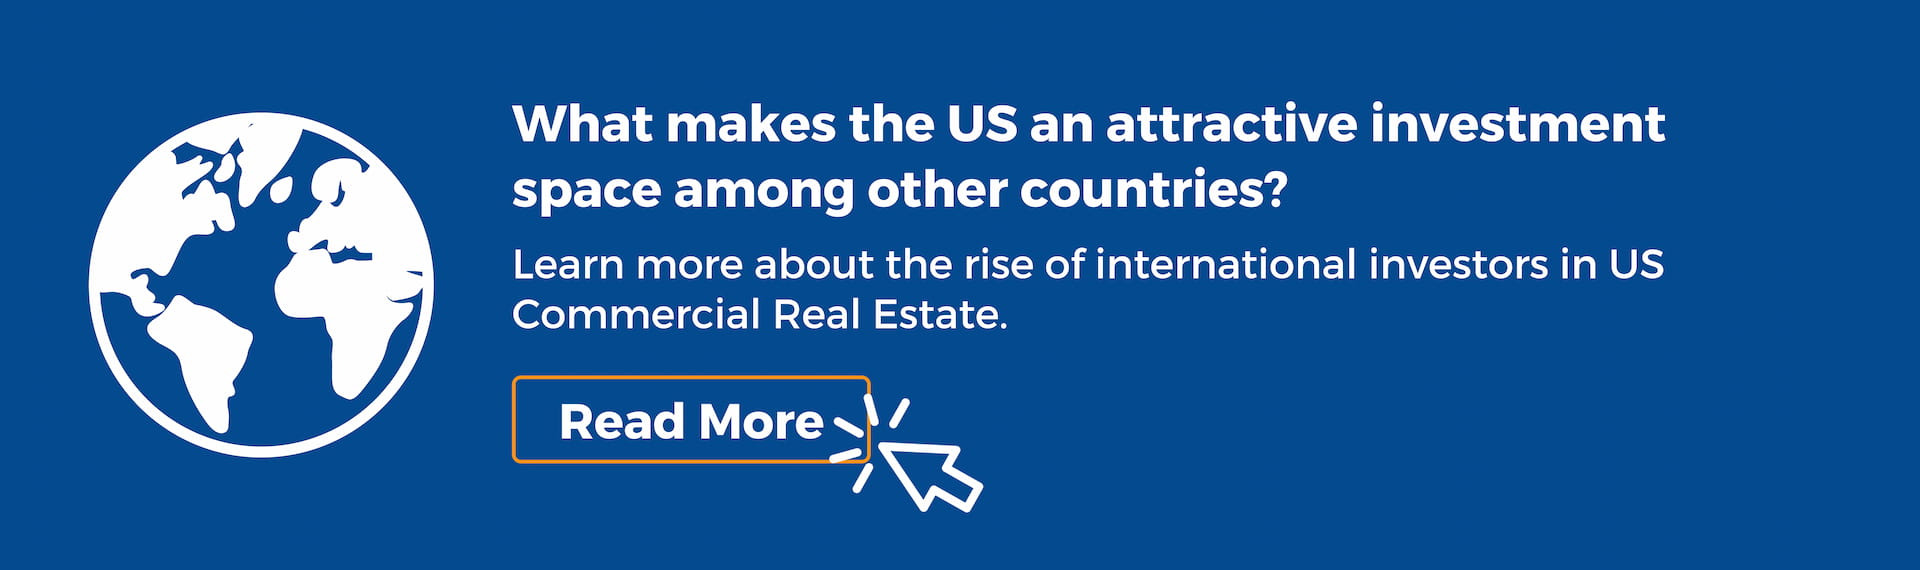 international-investors-and-us-opportunities